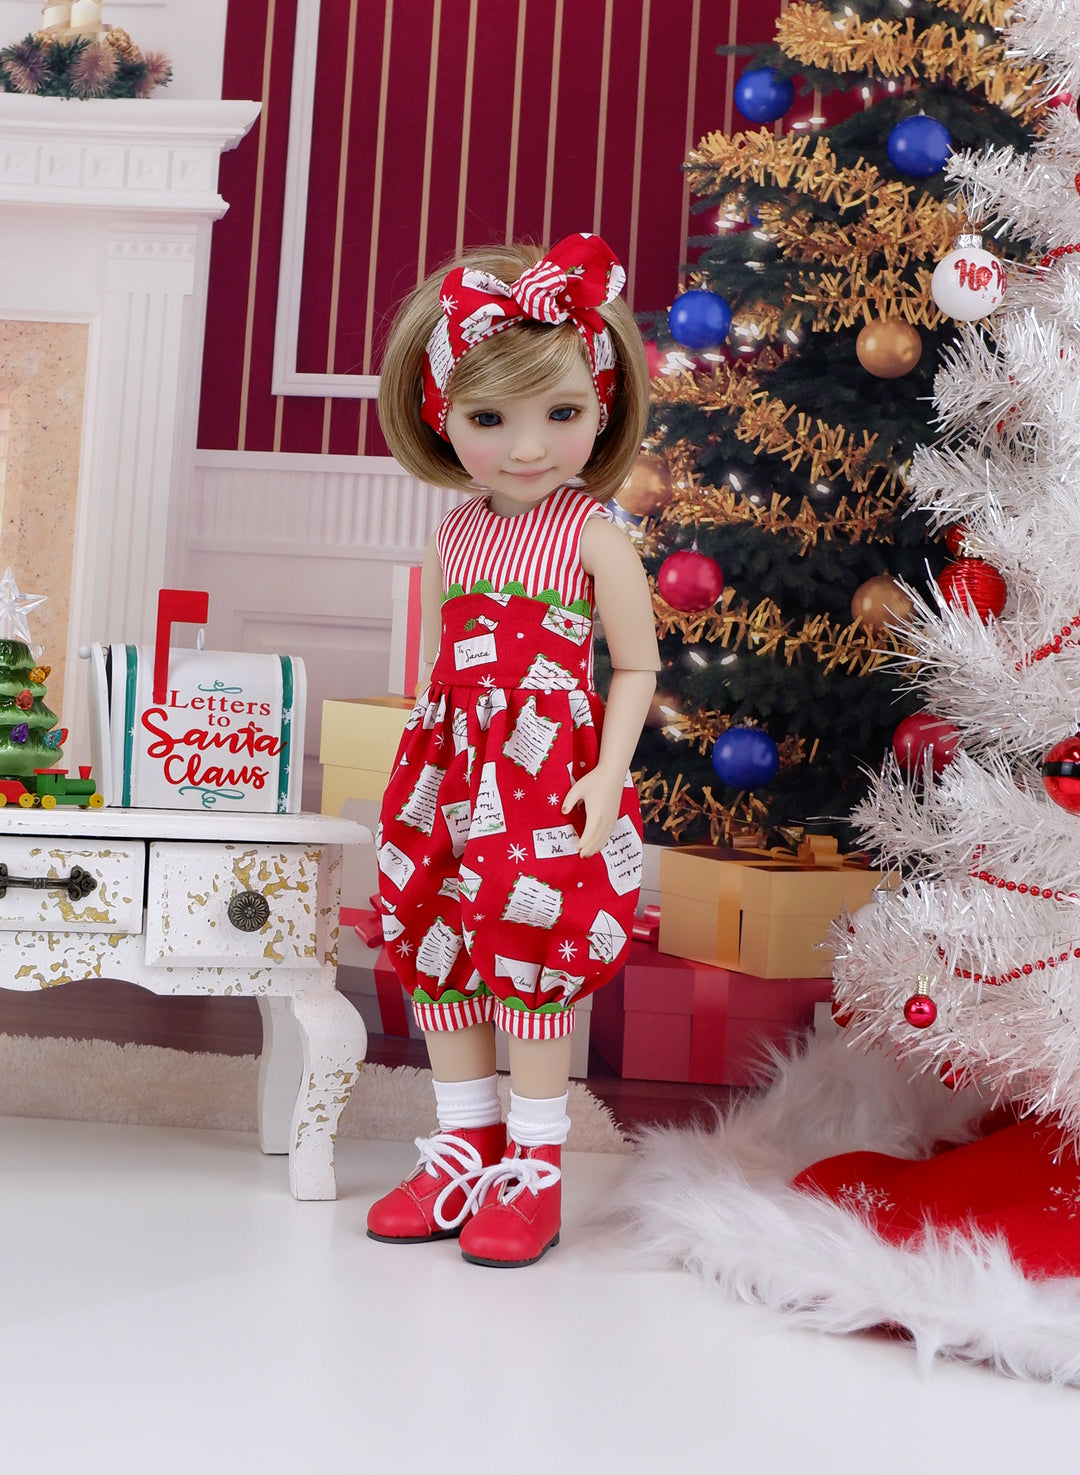 Letters to Santa - romper with boots for Ruby Red Fashion Friends doll